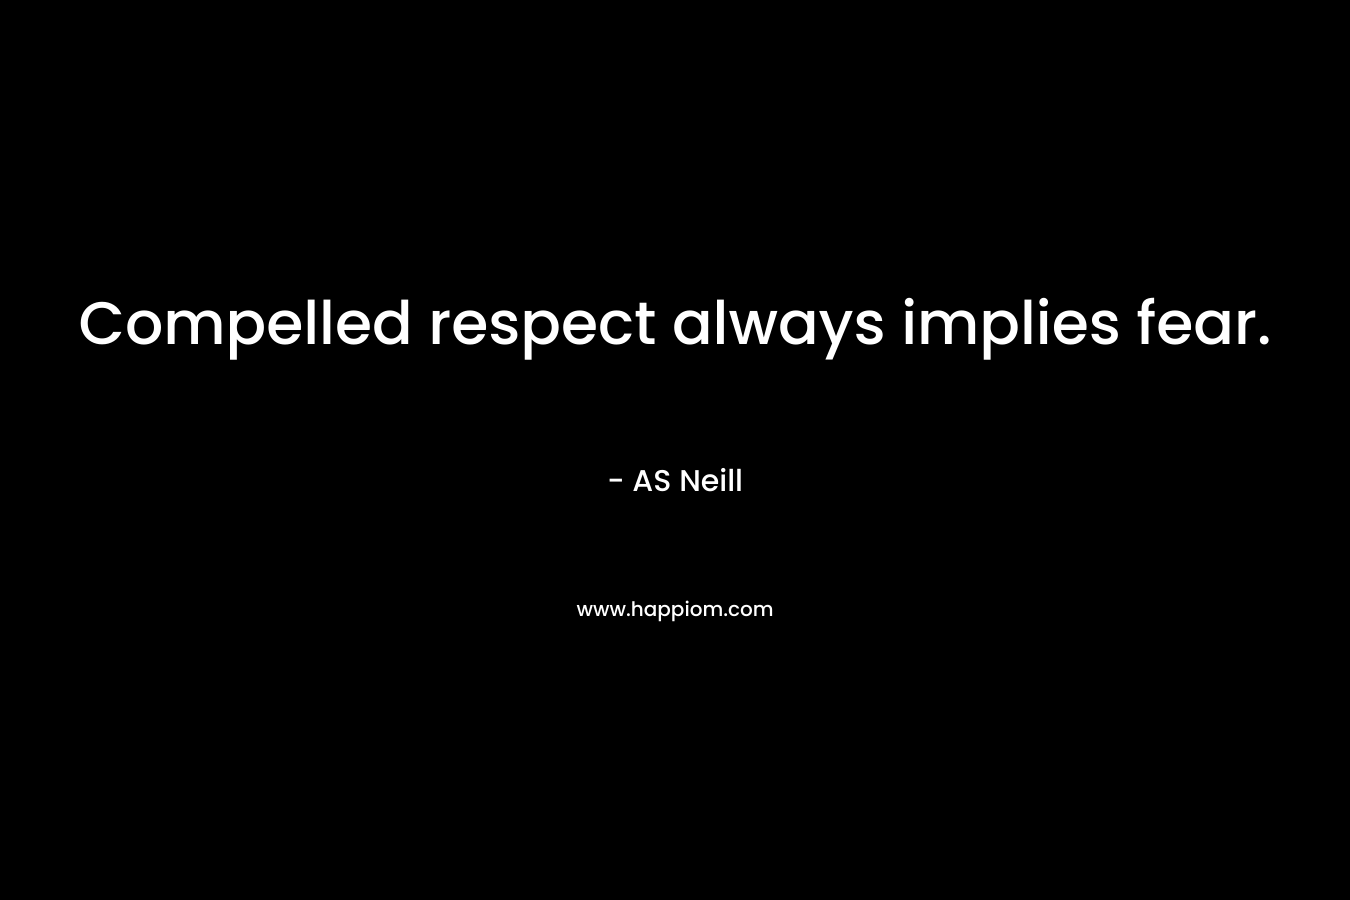 Compelled respect always implies fear. – AS Neill